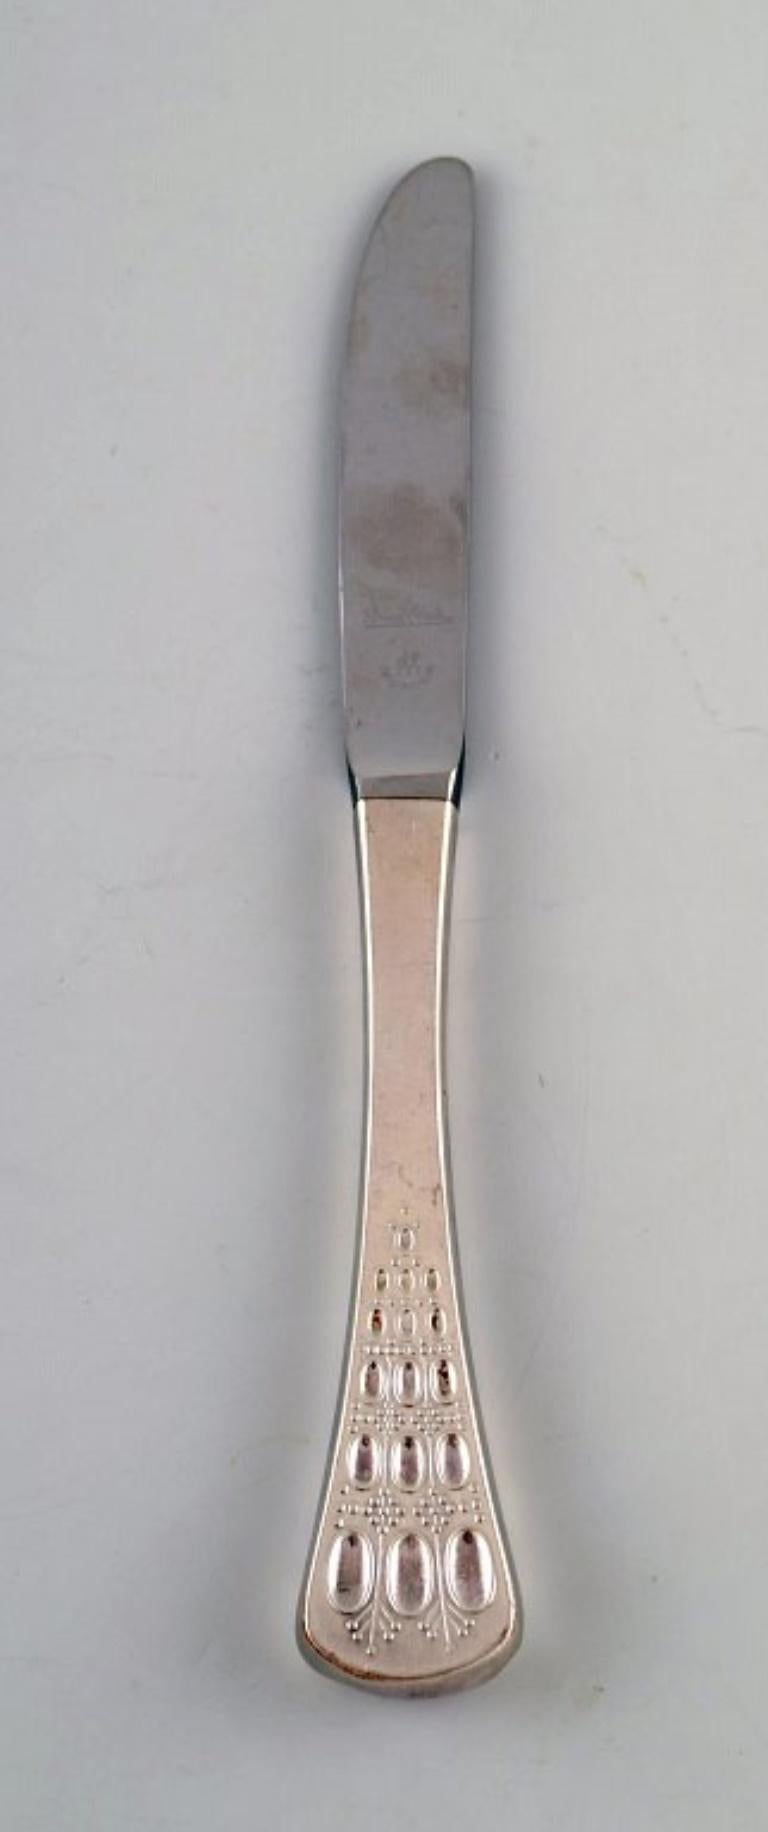 Bjørn Wiinblad, cutlery, 'Romanze' for Rosenthal.
Two lunch knives in sterling silver.
Designed in 1962. 
Stamped with crescent, crown and '925'.
Measures: 20.5 cm.
In very good condition.